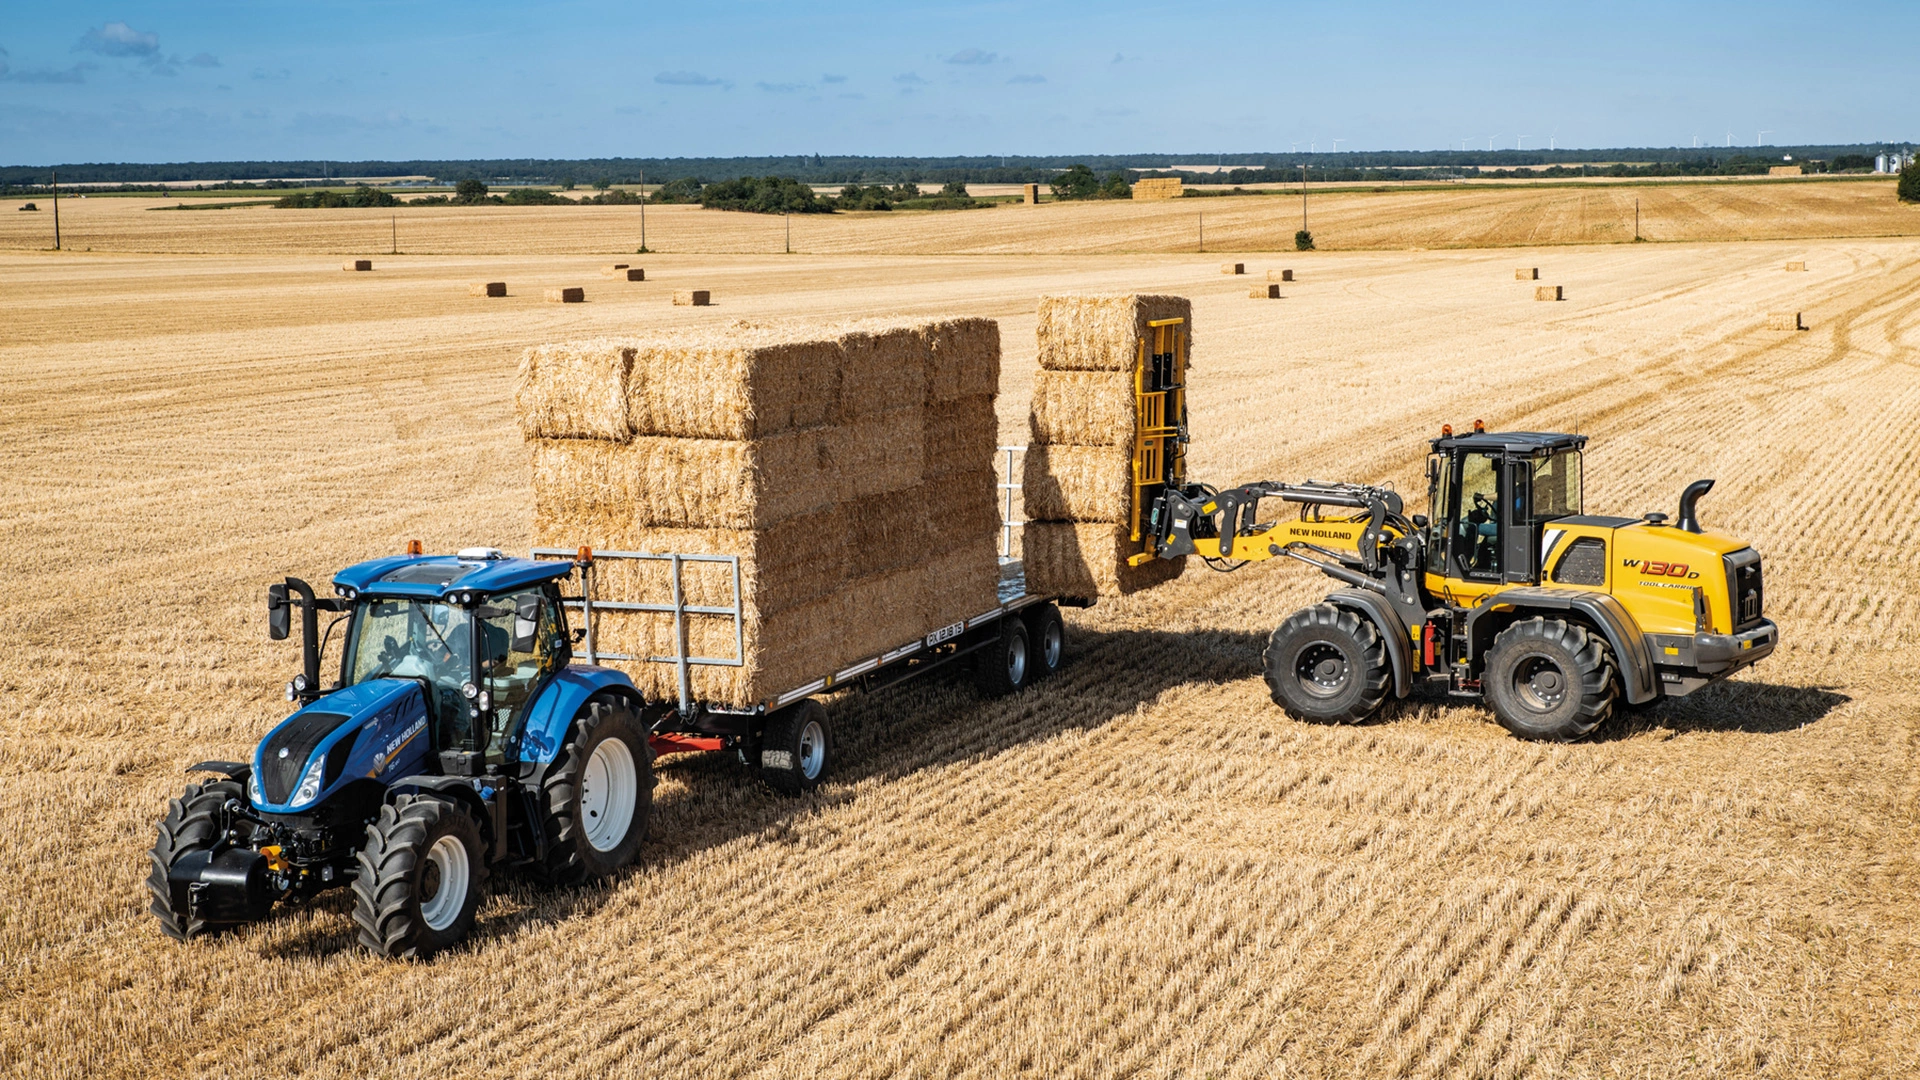 New Holland W300D wheel loader efficiently stacking large hay bales on a trailer in a harvested field.